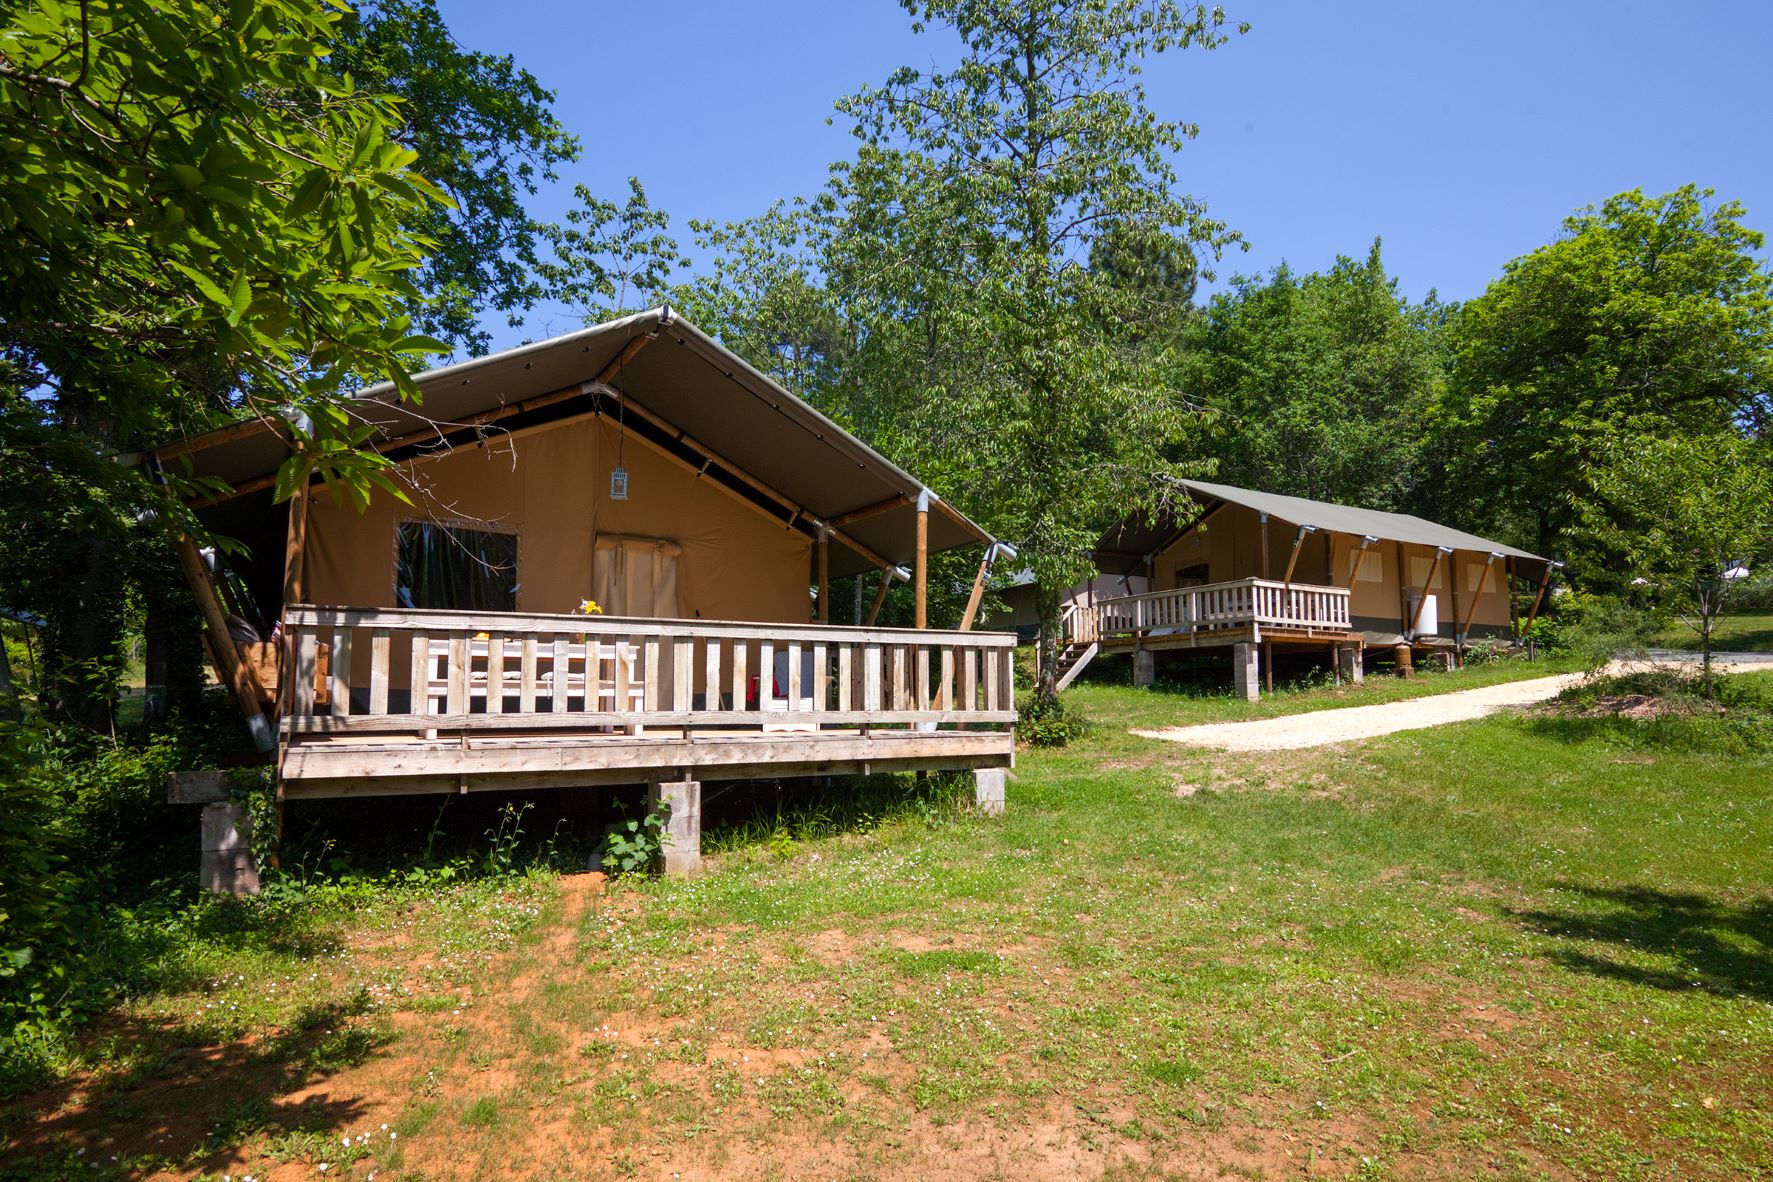 Accommodation - Safaritent Luxe - Camping Le Clou